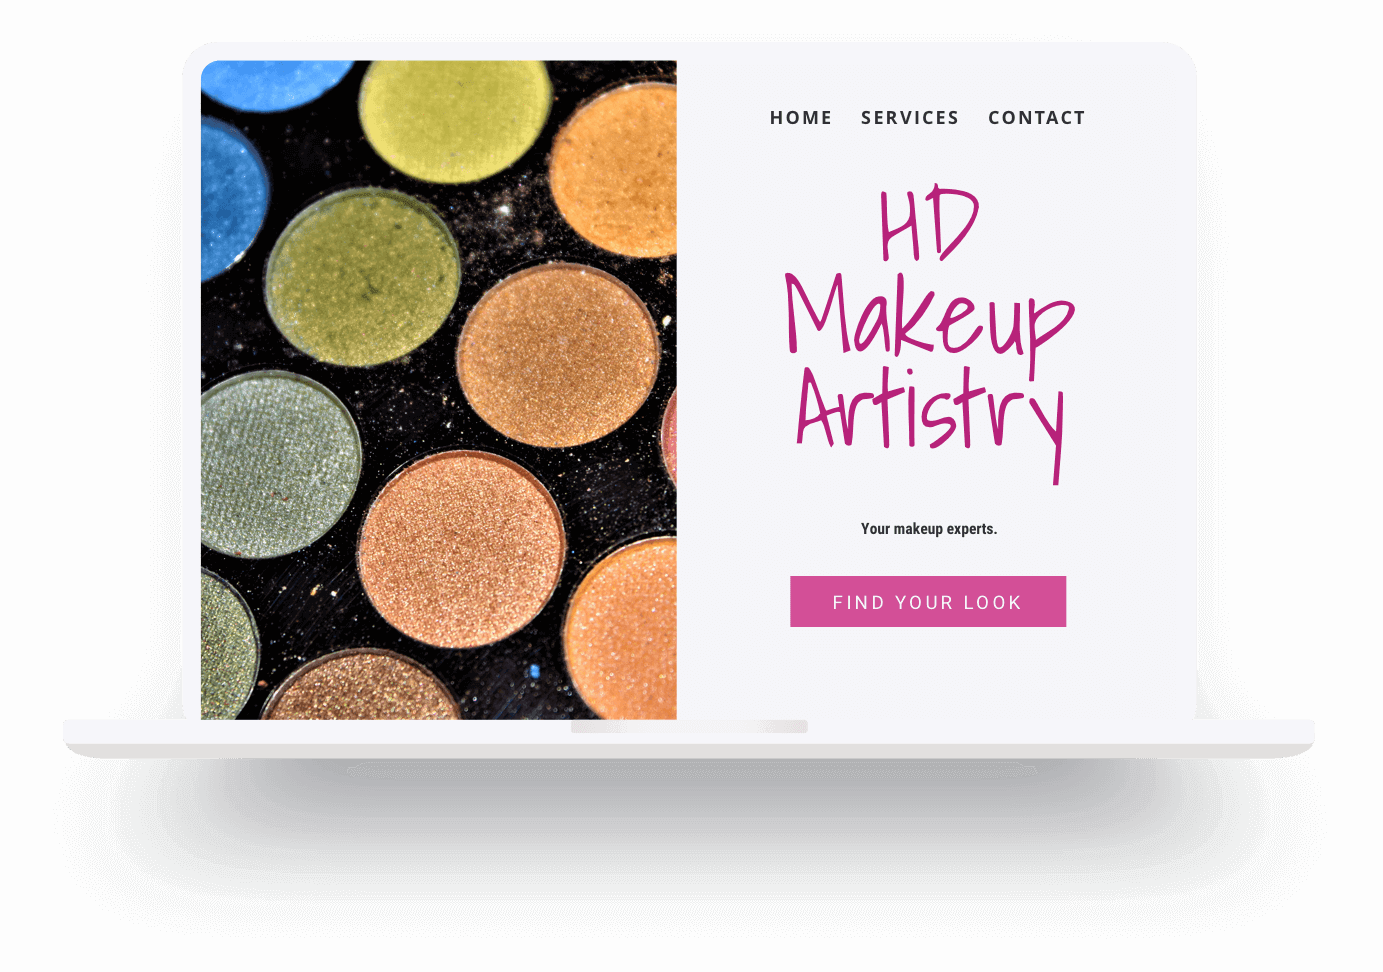 Example of a makeup artist website made with Jimdo